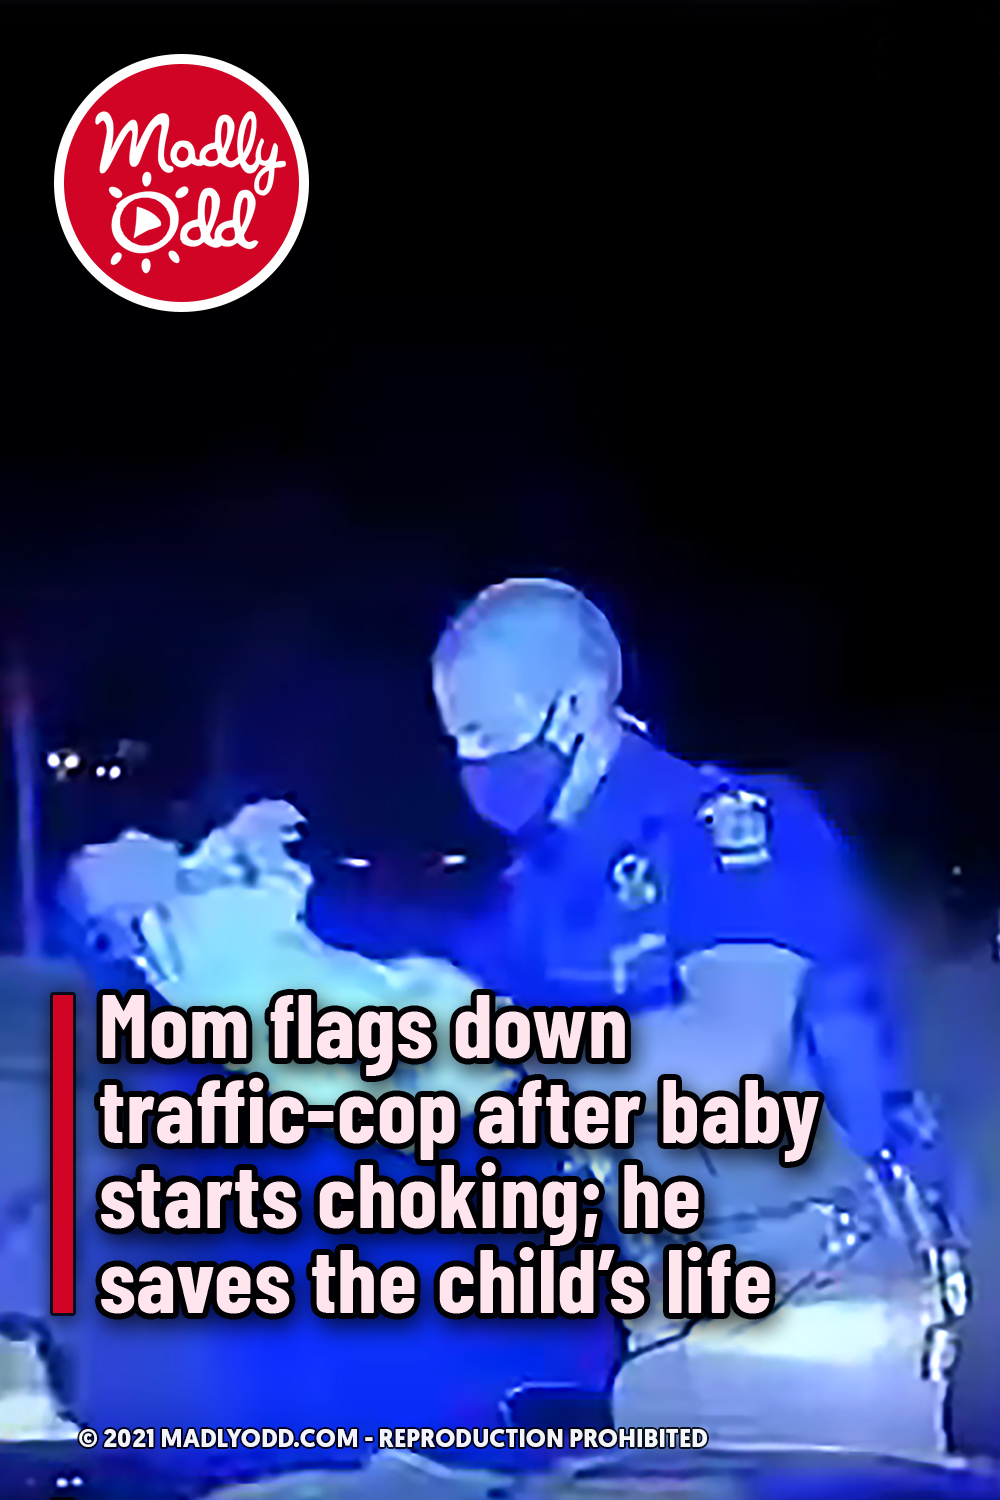 Mom flags down traffic-cop after baby starts choking; he saves the child’s life